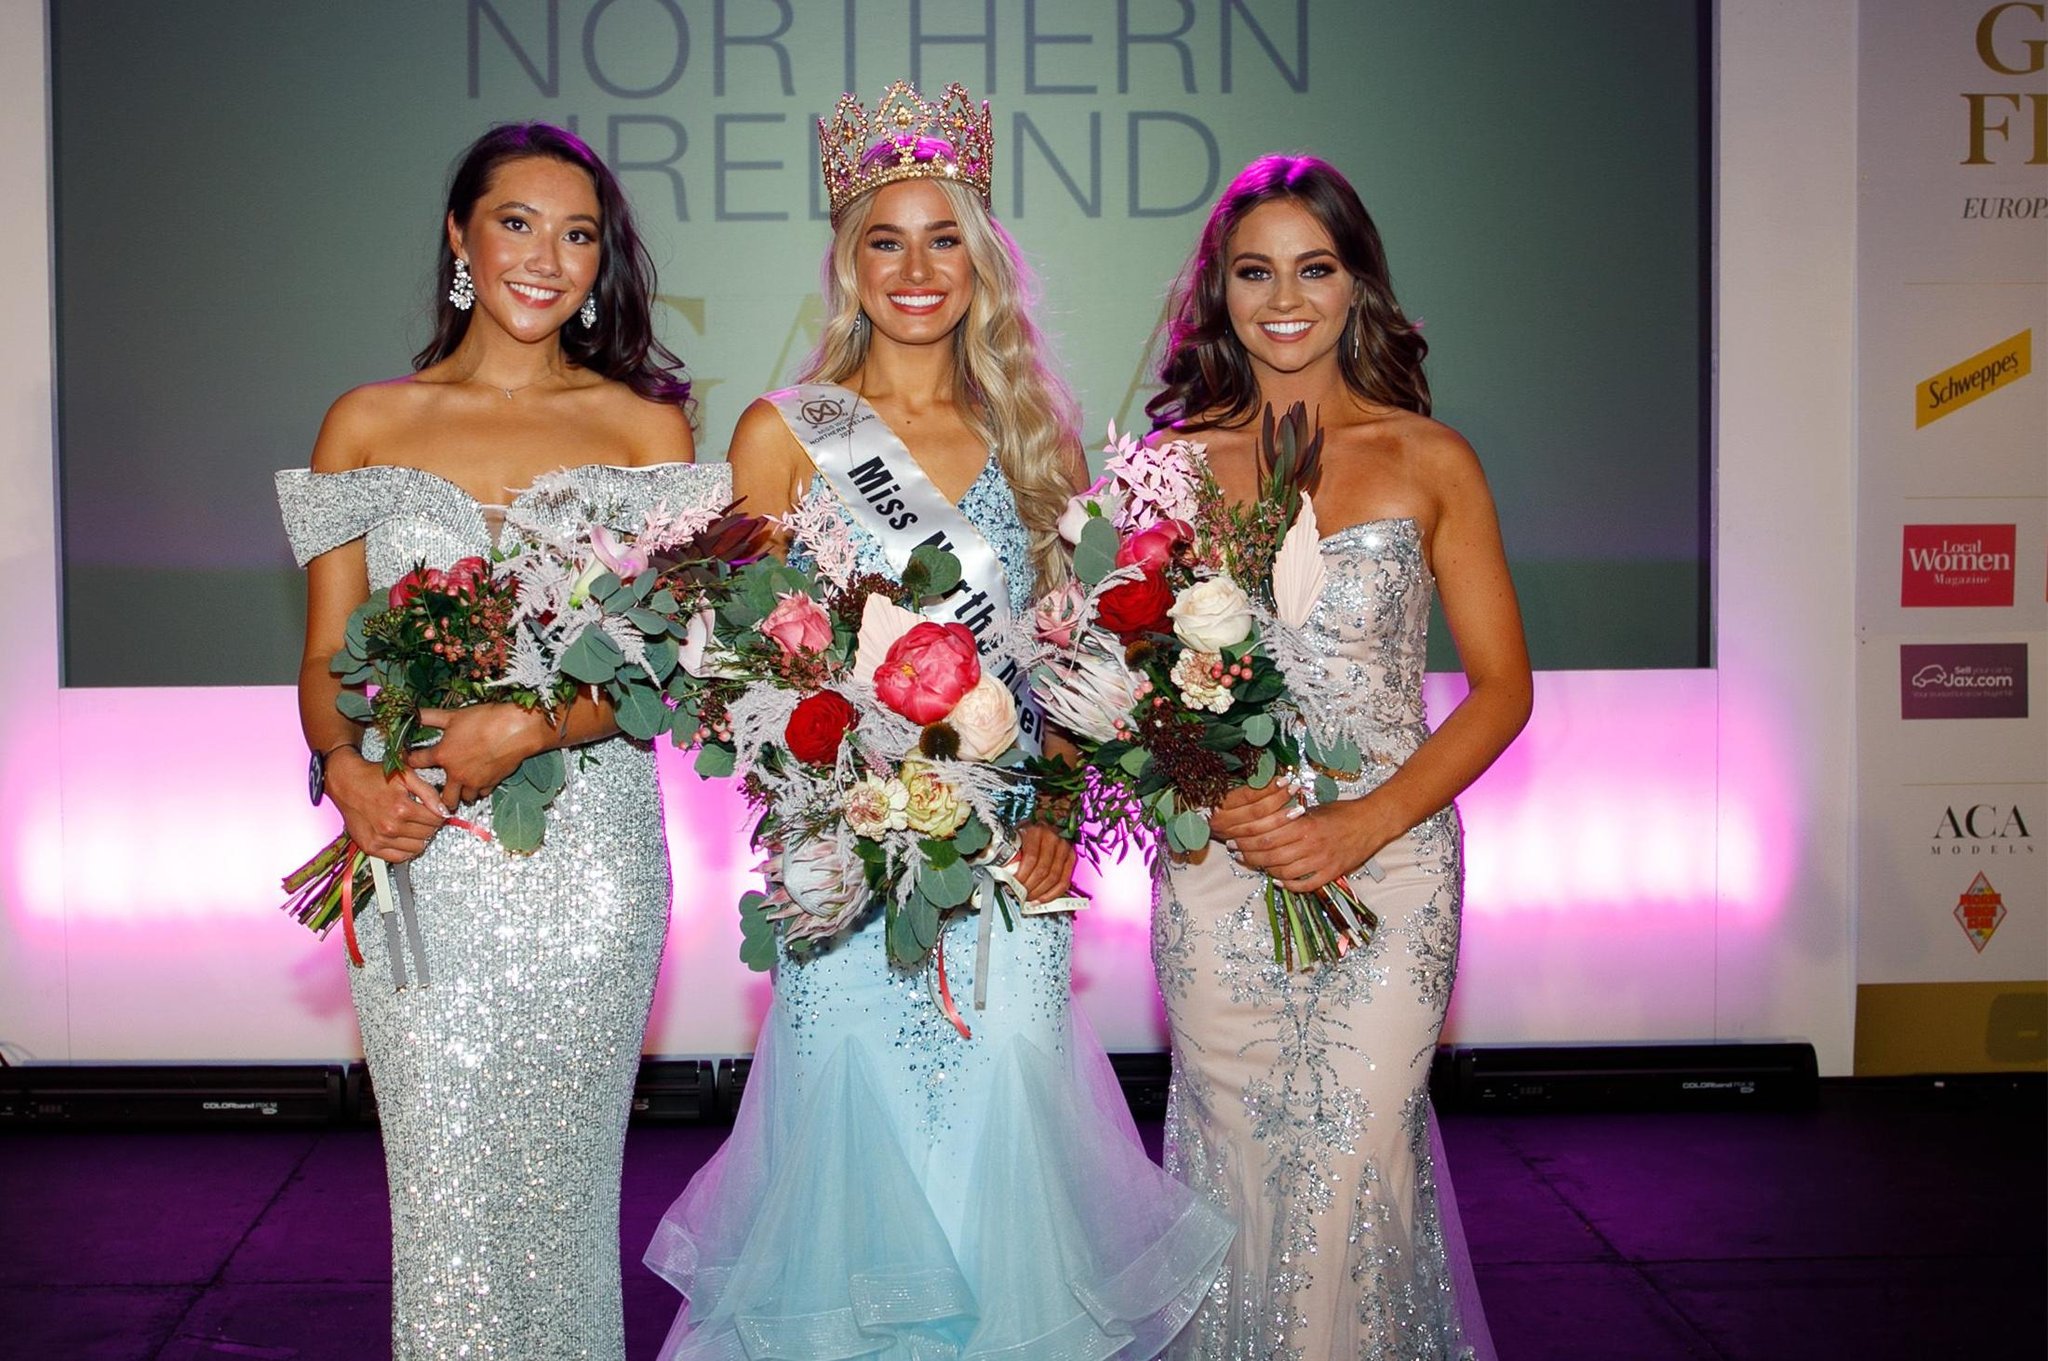 Find out who won Miss Northern Ireland 2022